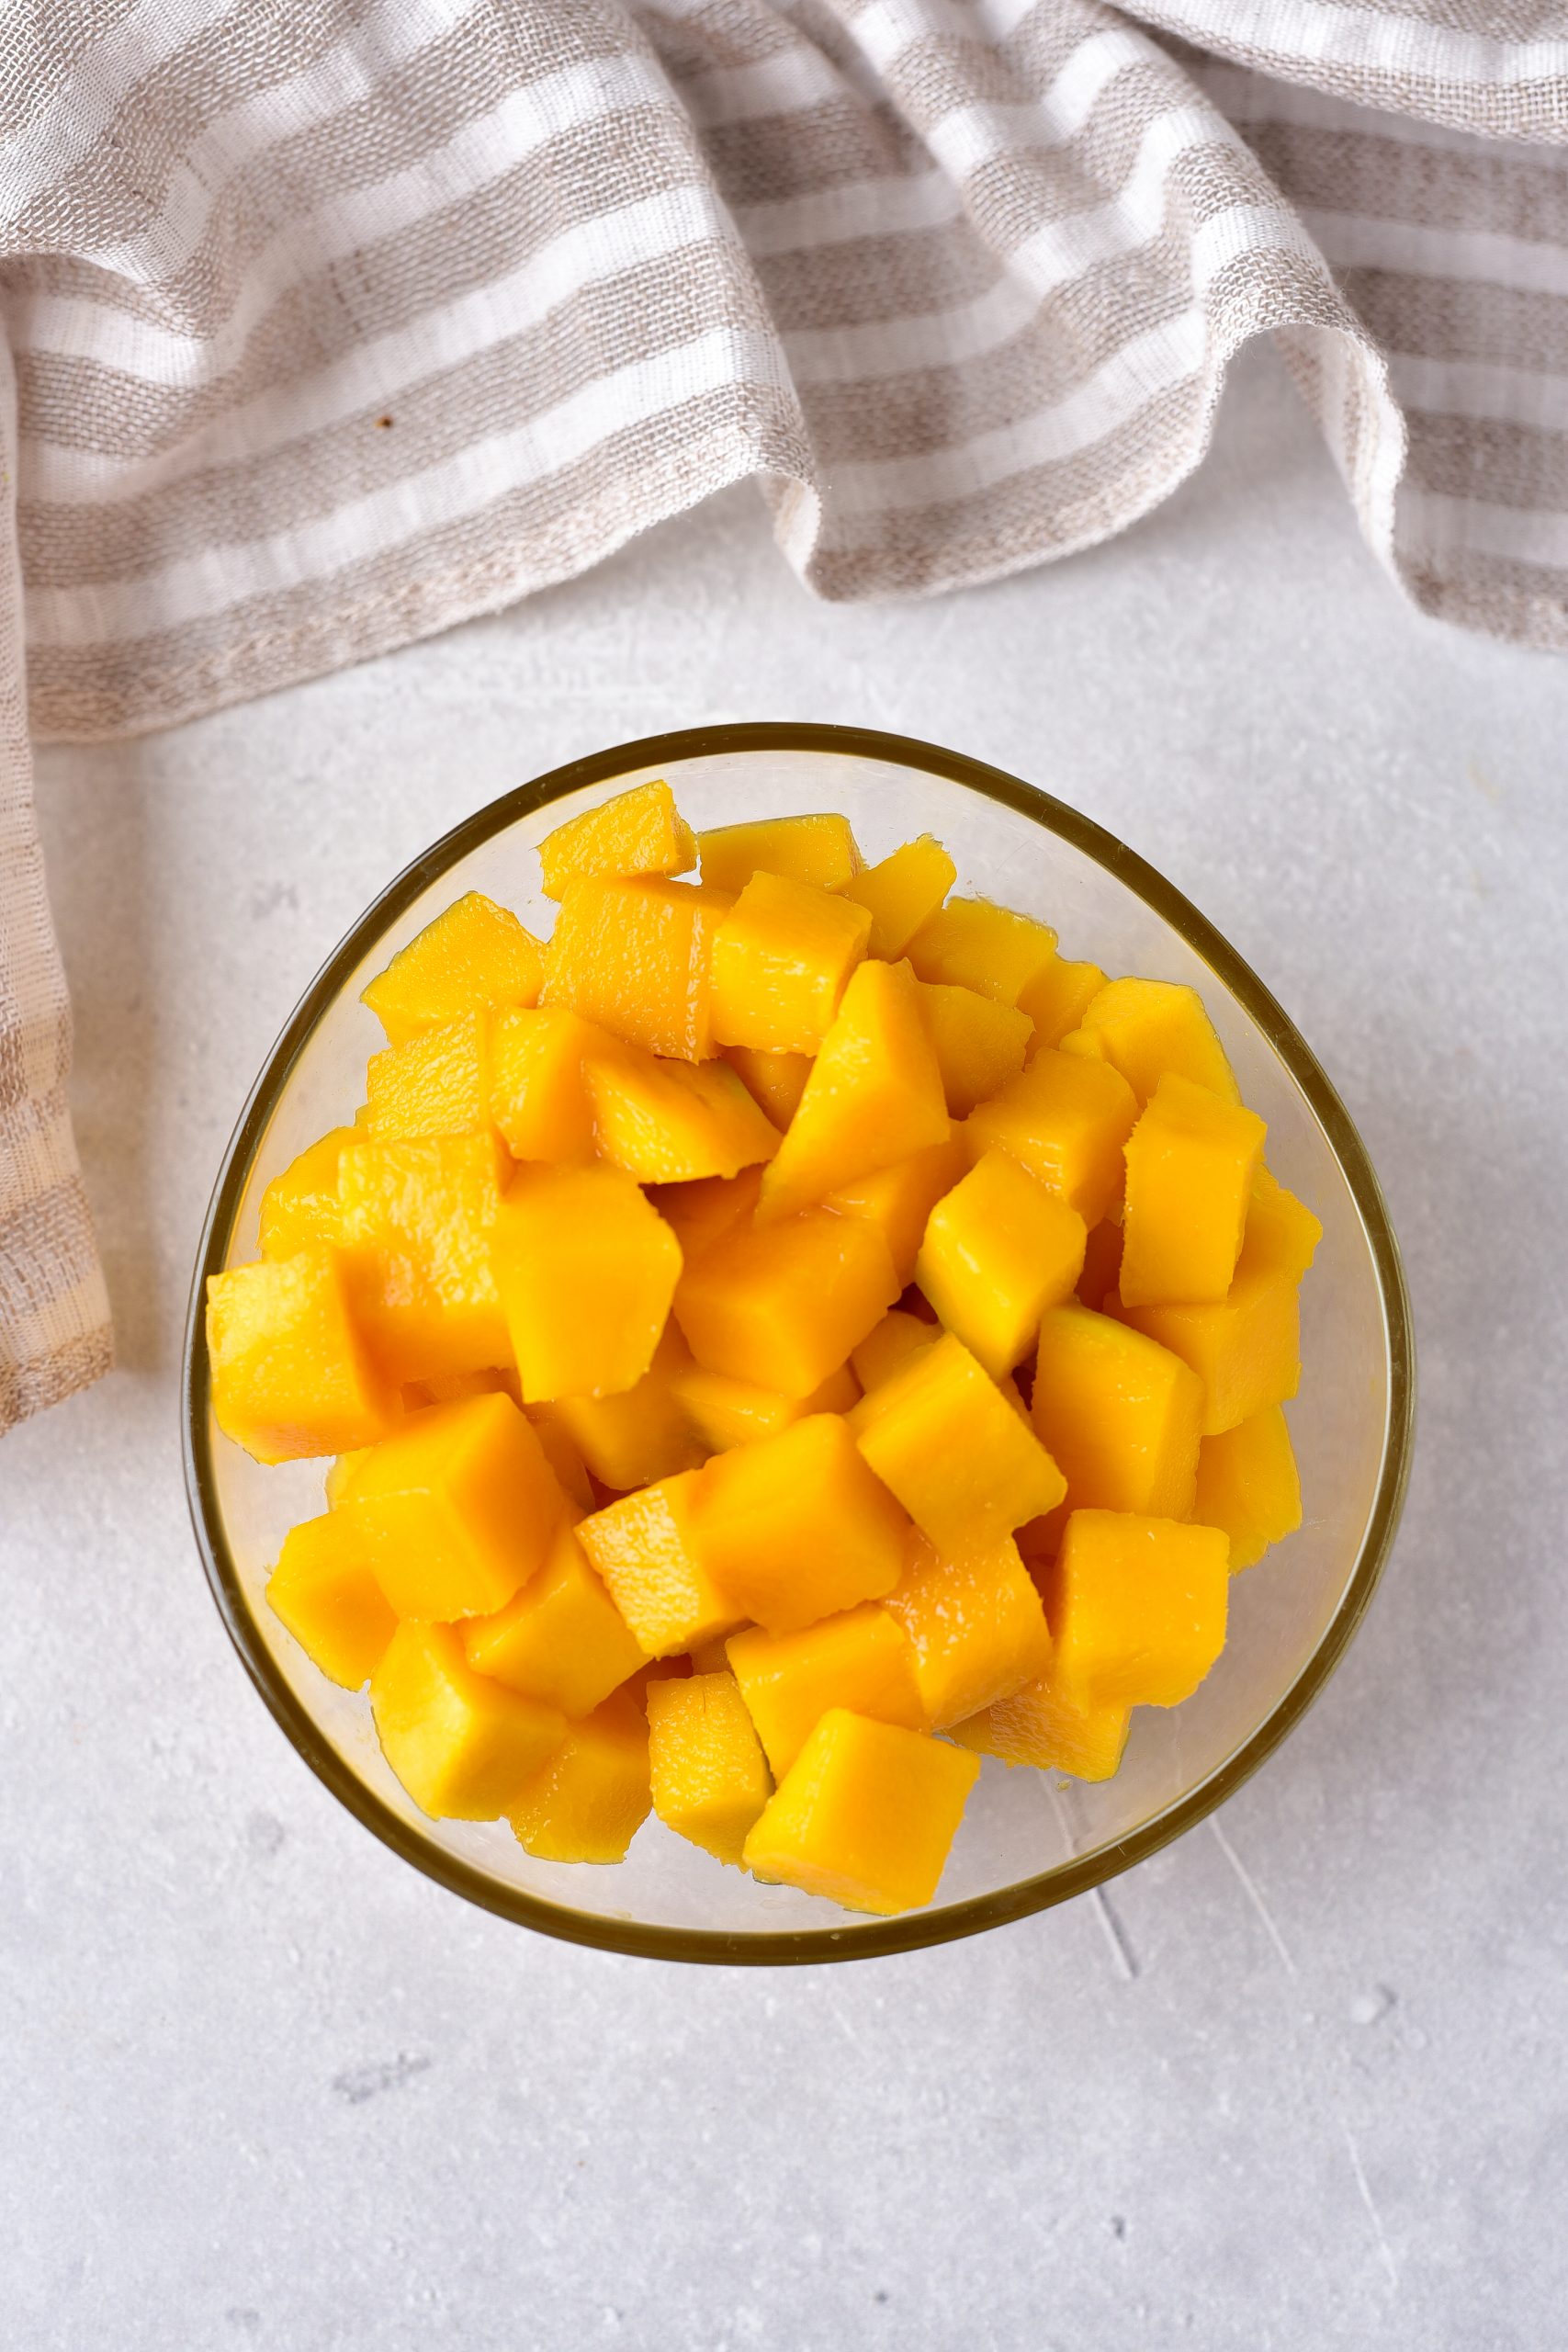 Cut the fresh mango into small pieces